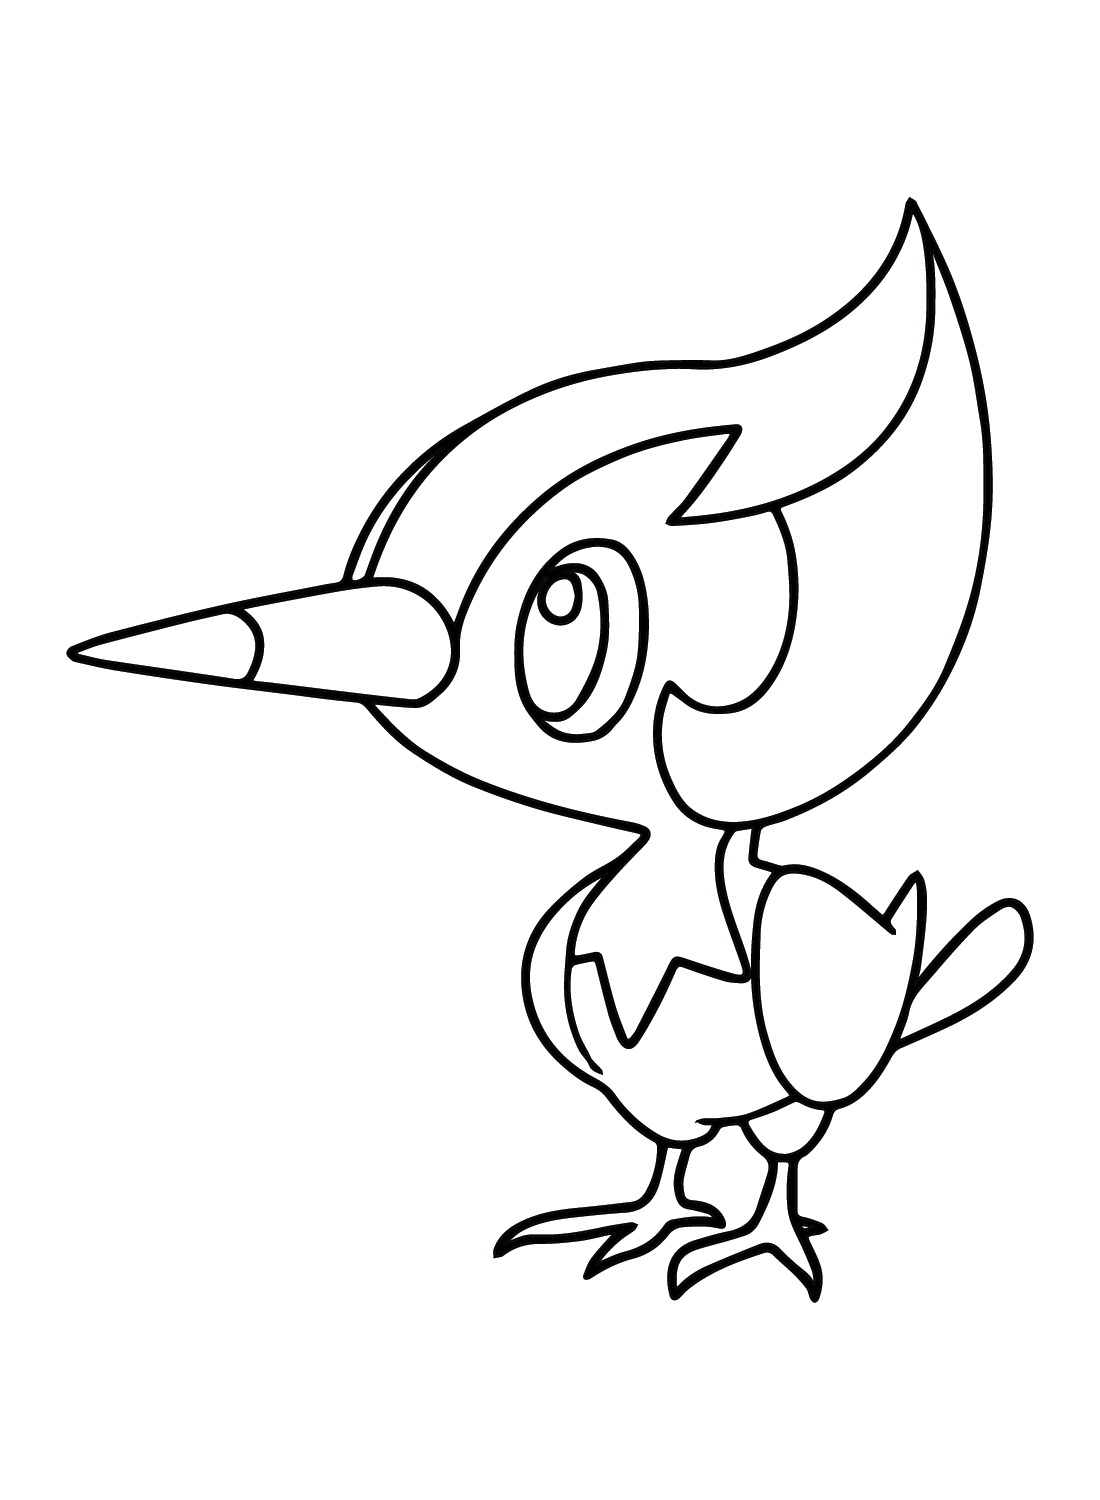 The Pikipek Coloring Page